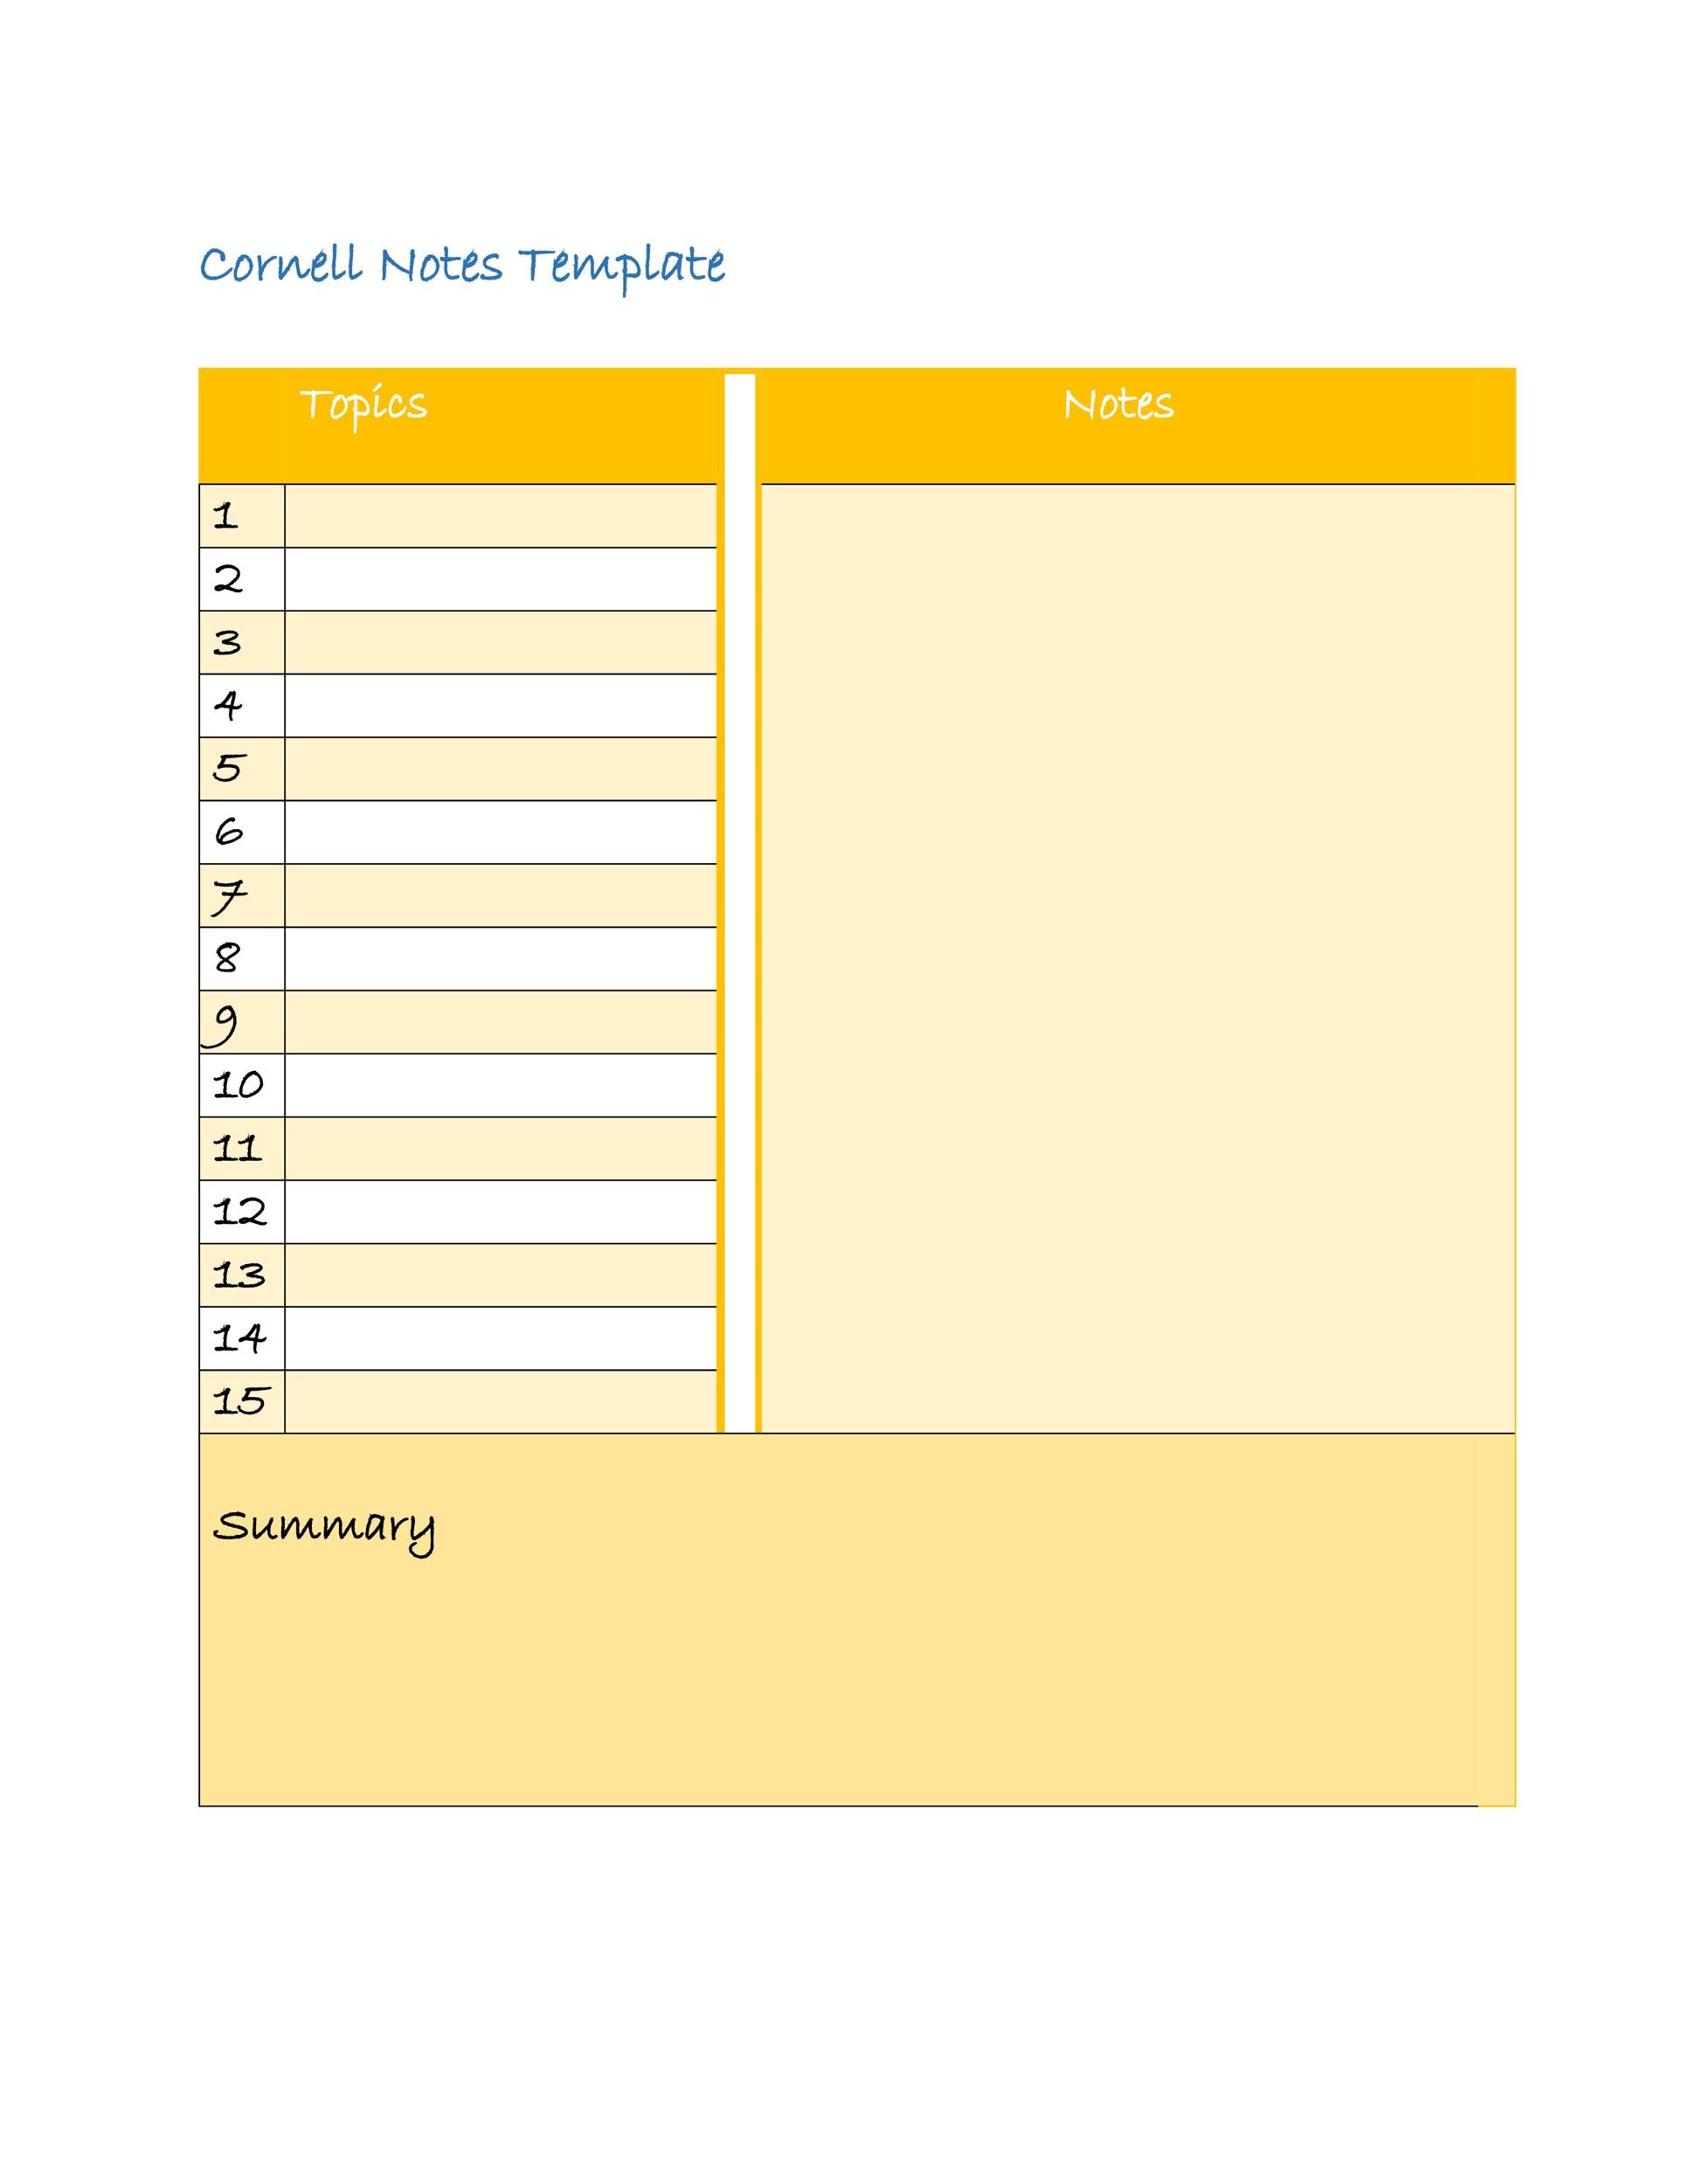 37 Cornell Notes Templates & Examples [Word, Excel, PDF] ᐅ